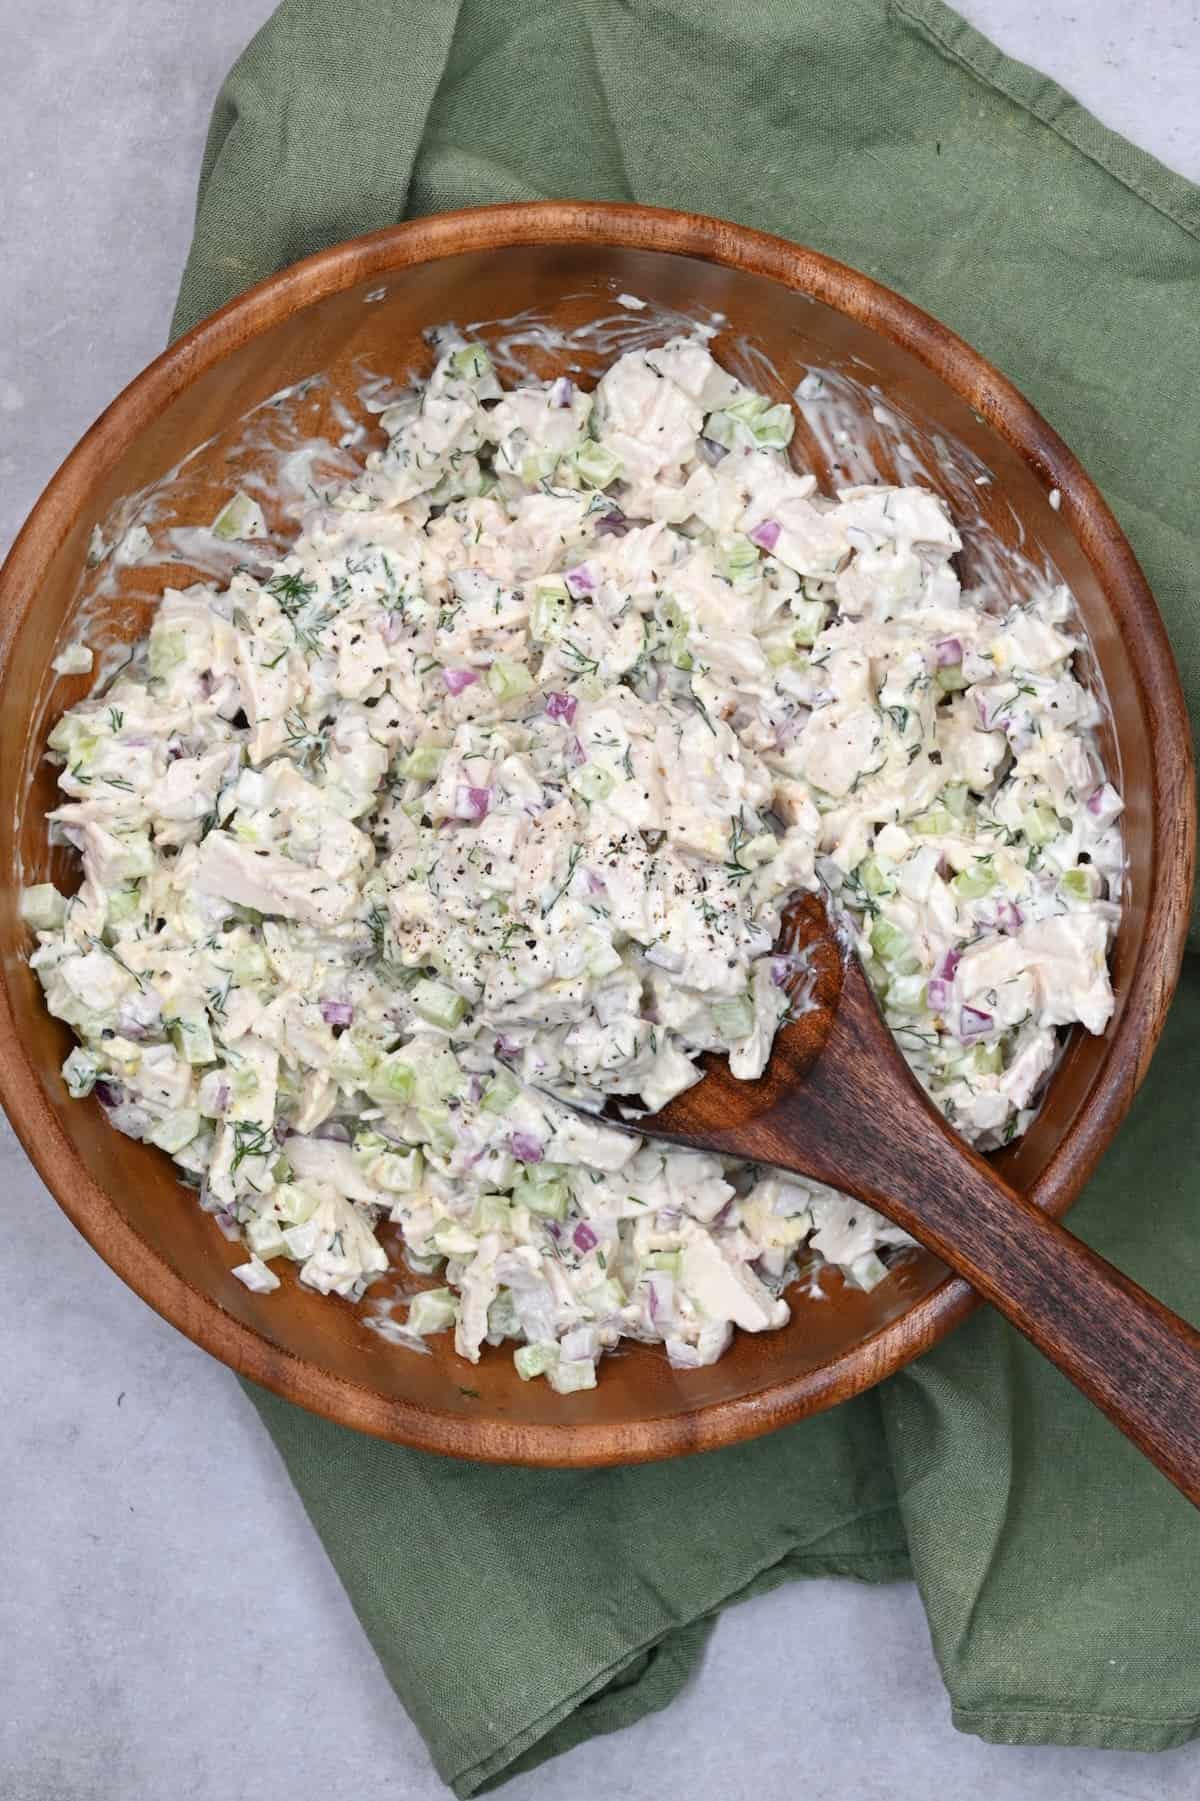 Homemade chicken salad in a bowl